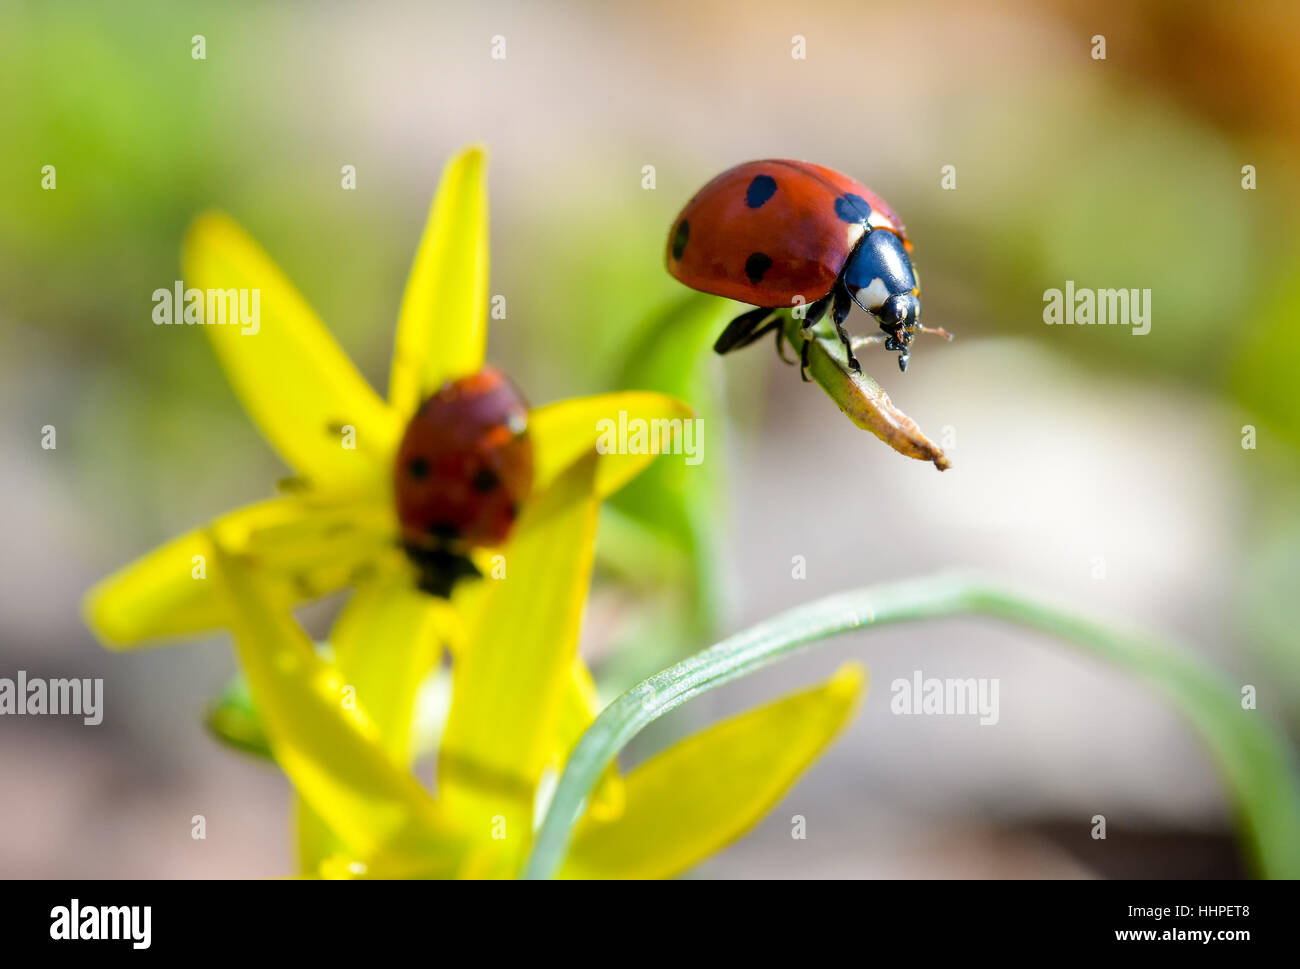 Ladybug on top of grass in natural light Stock Photo